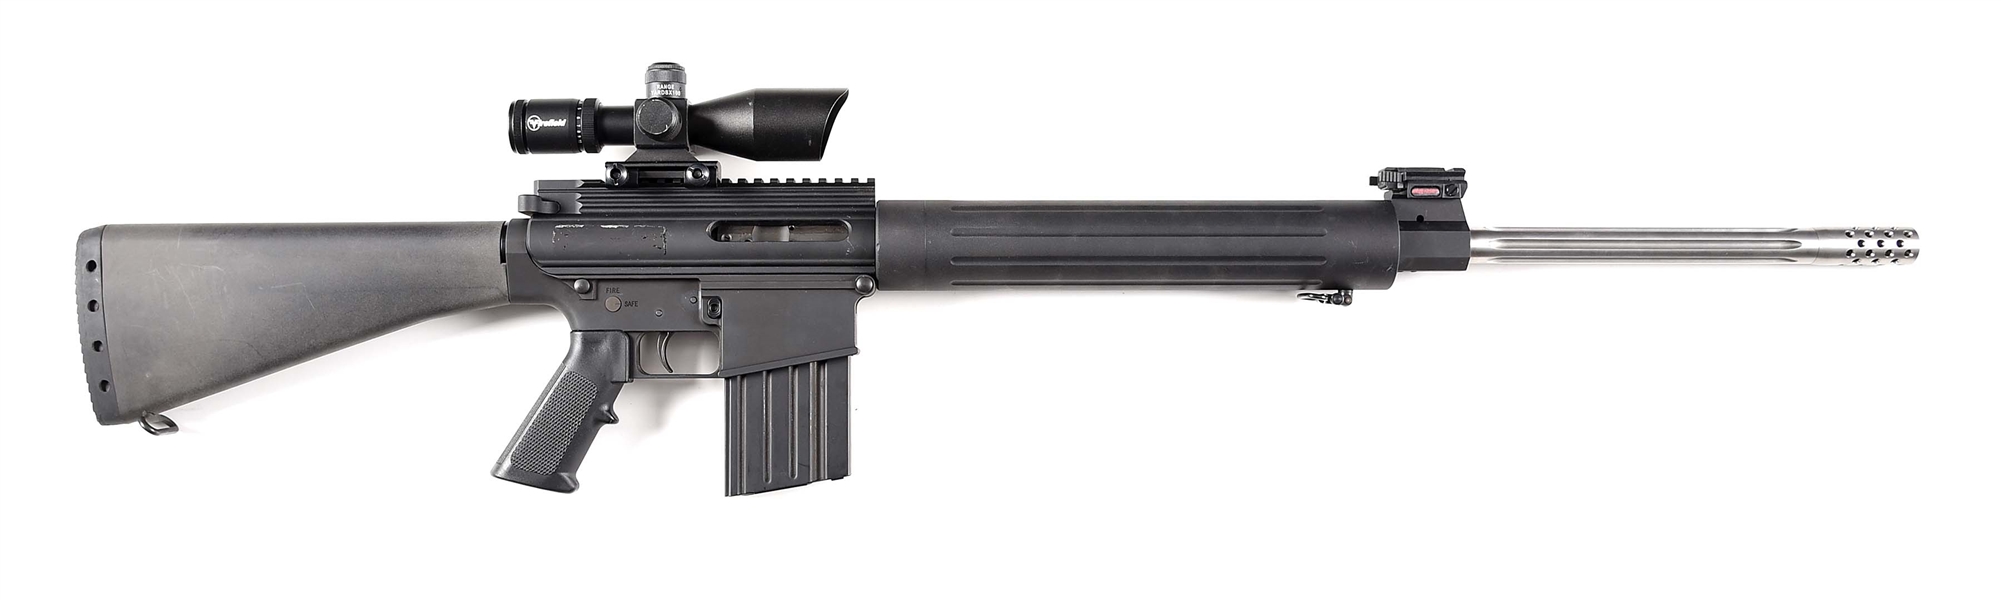 (M) DPMS PANTHER ARMS LR-308 SEMI AUTOMATIC RIFLE WITH SCOPE